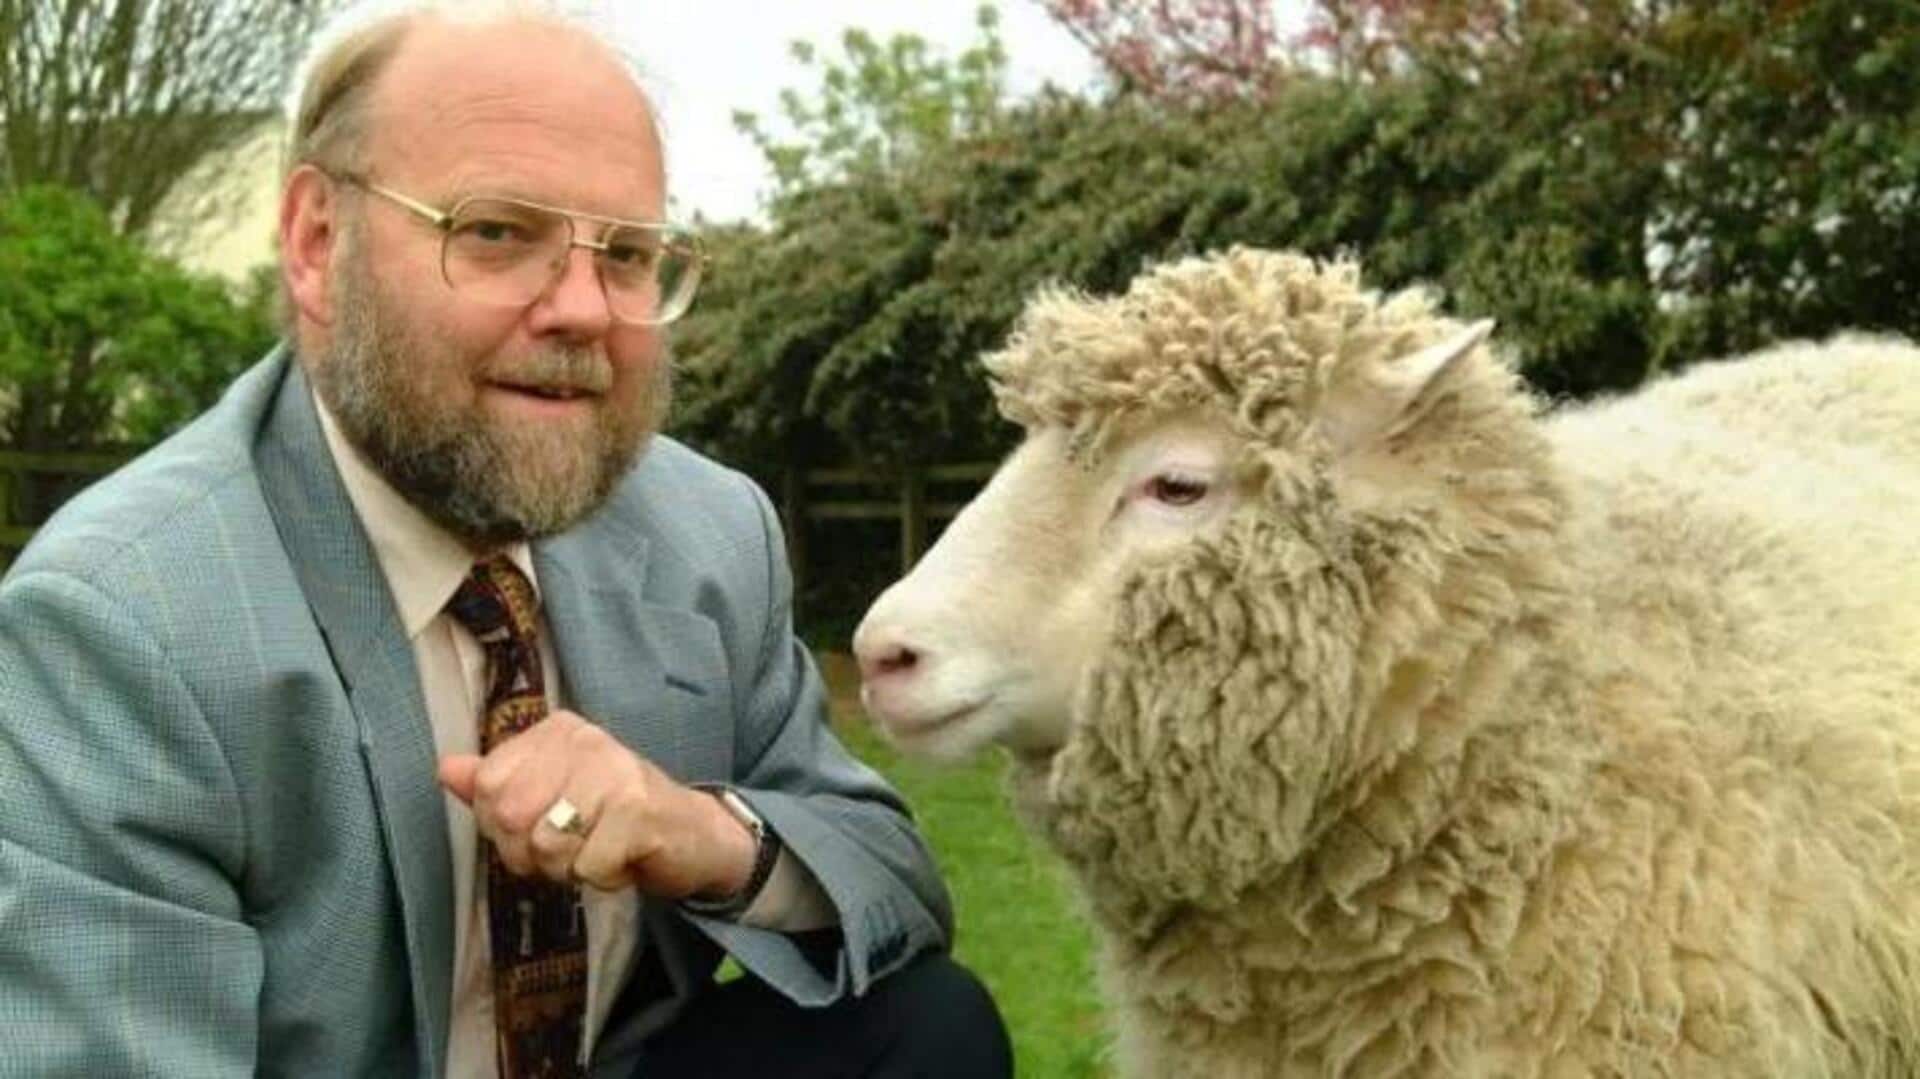 Ian Wilmut, who cloned Dolly the sheep, dies at 79 